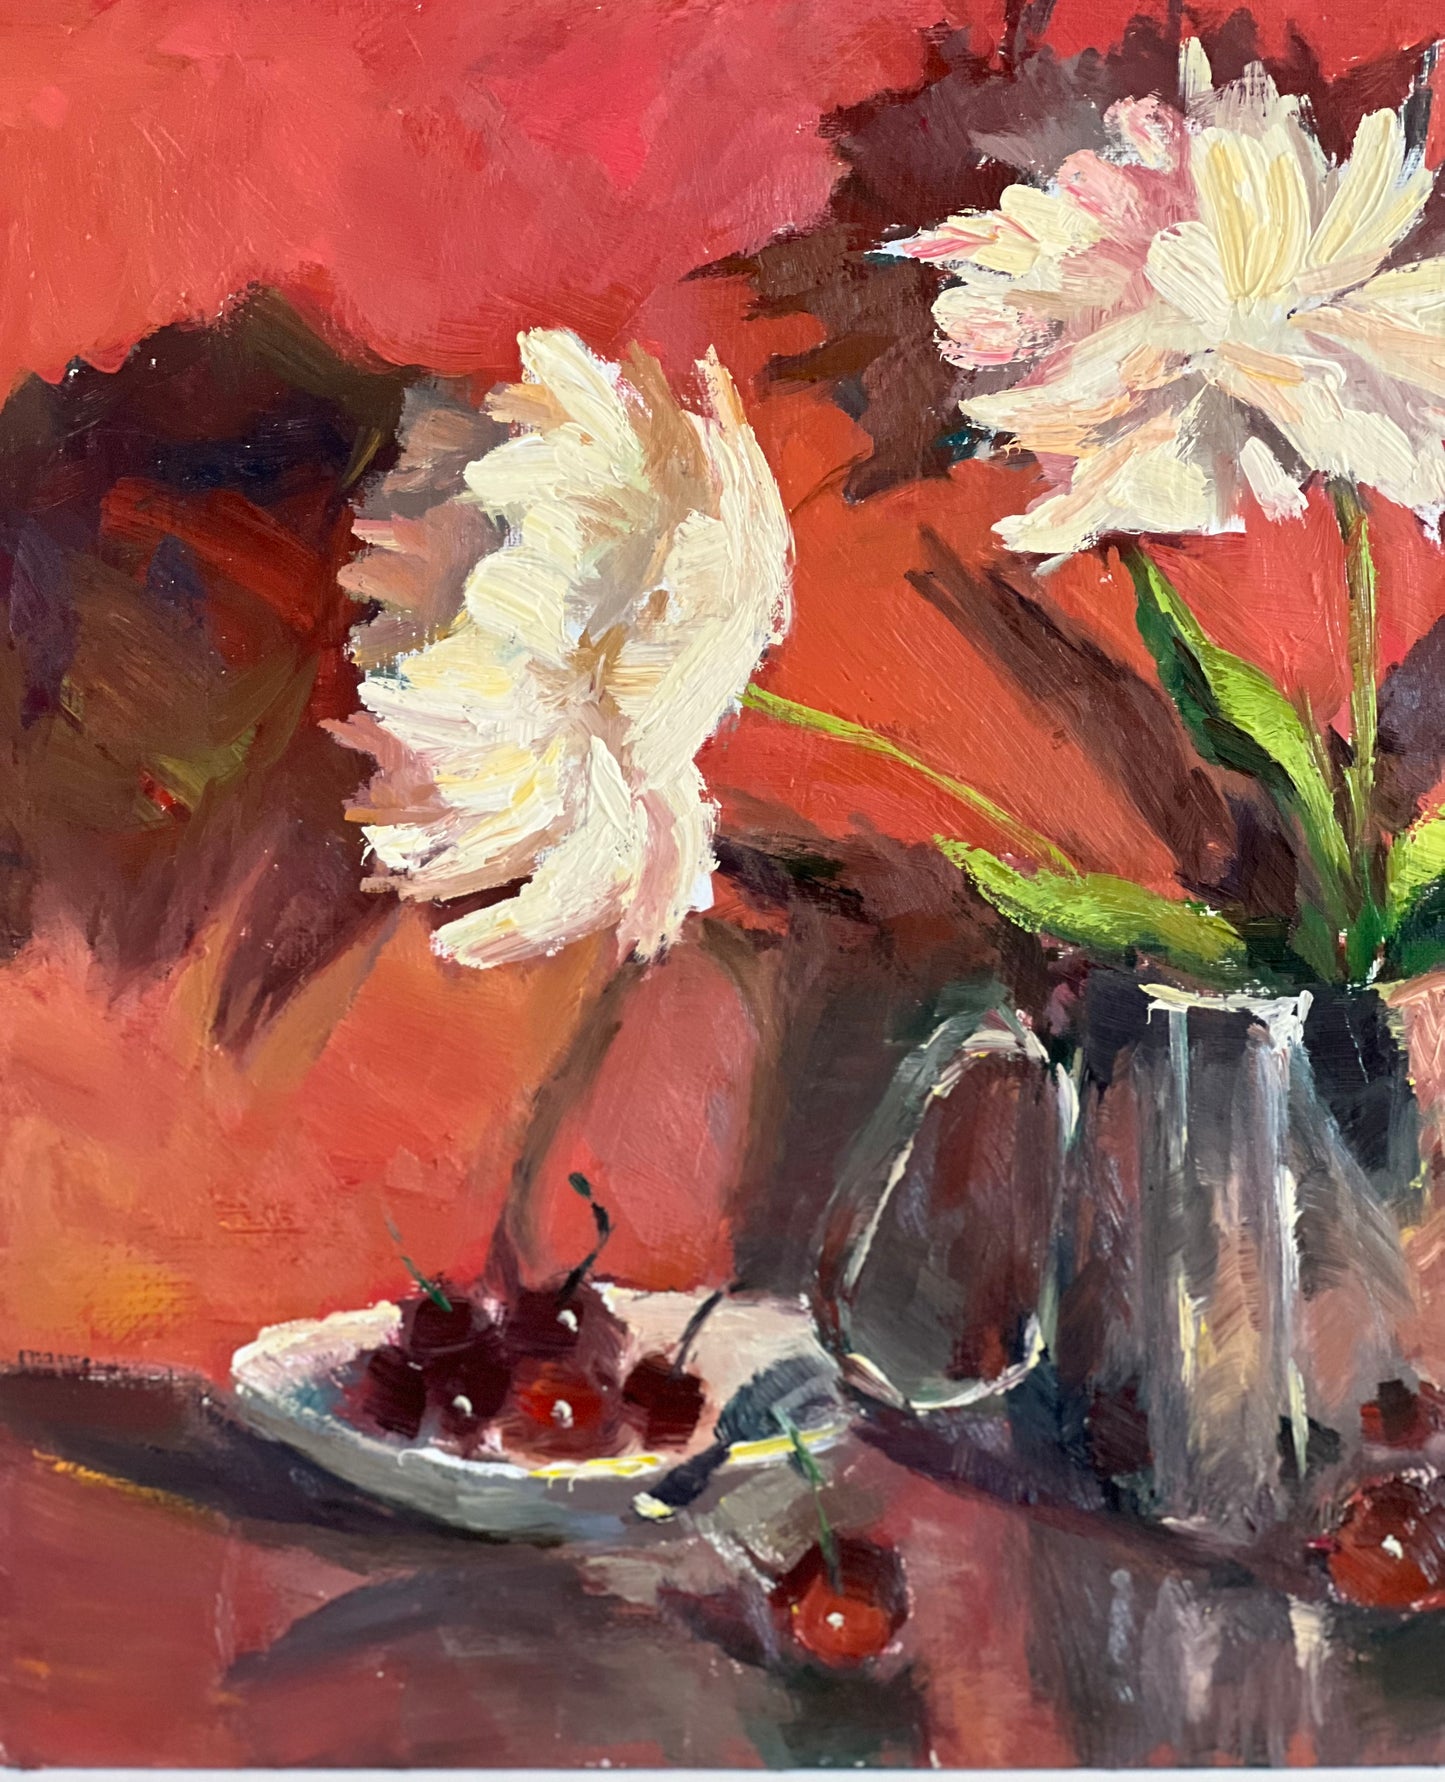 Peonies and Cherries Reflections - Still Life Oil Painting